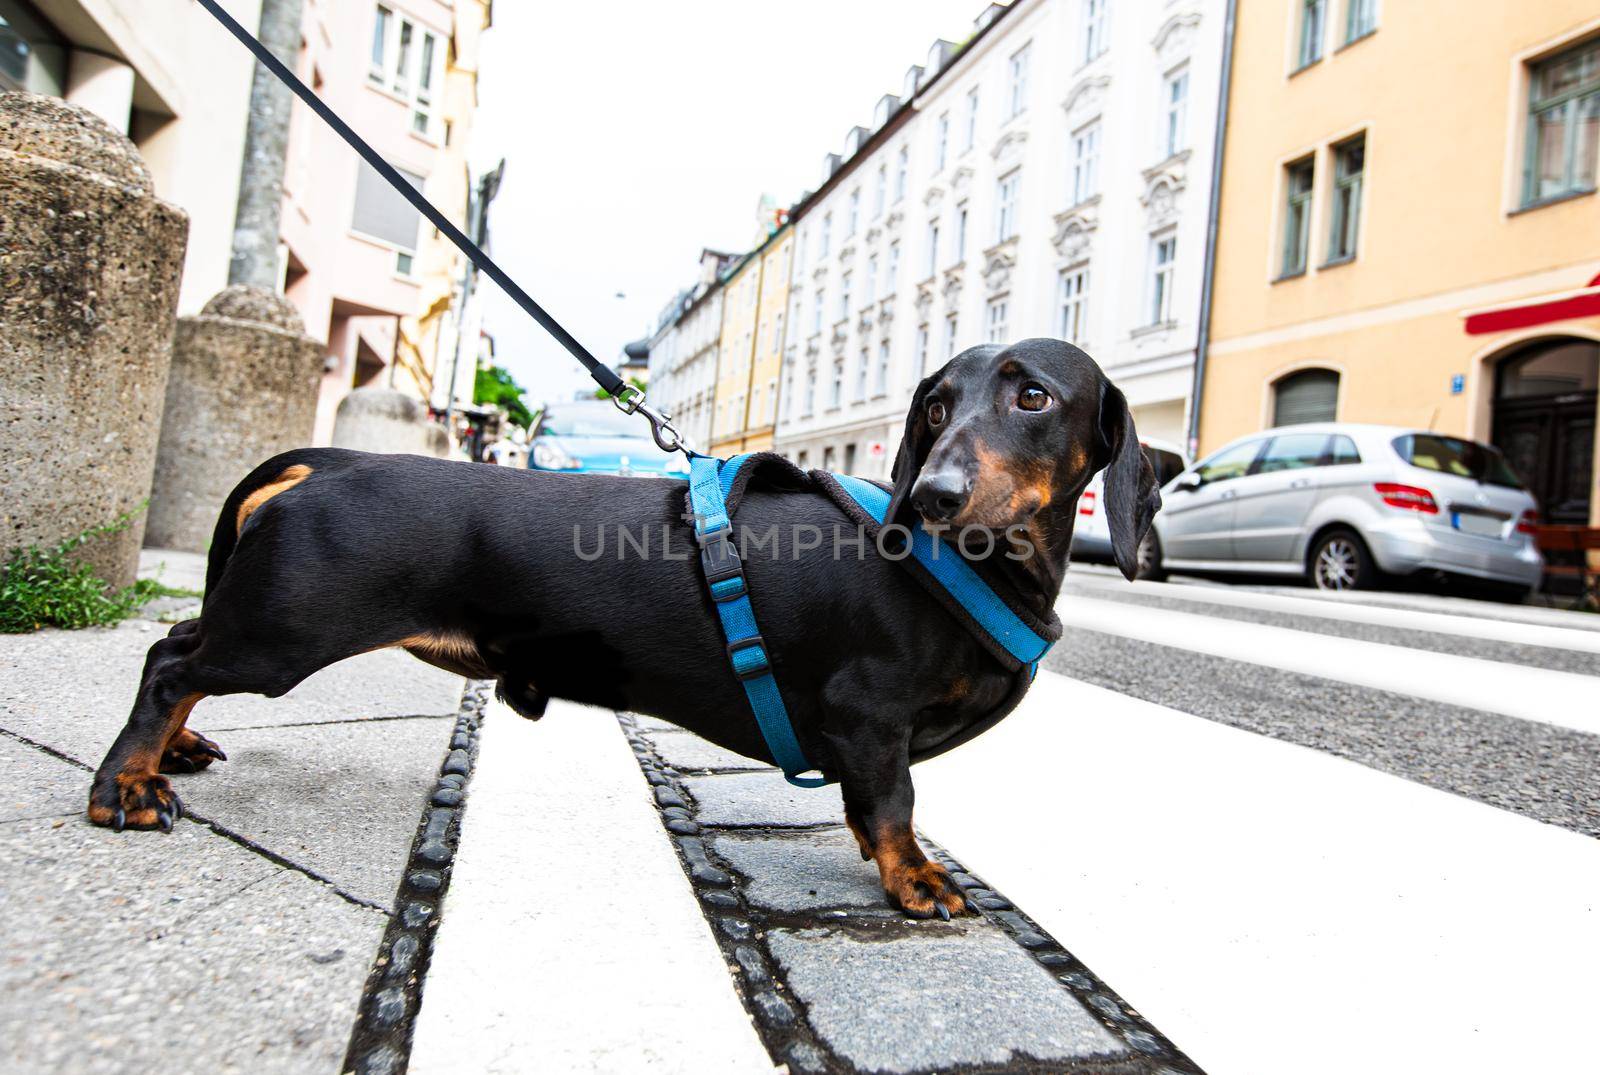 dachshund or sausage  dog waiting for owner to cross the street over crossing walk with leash,